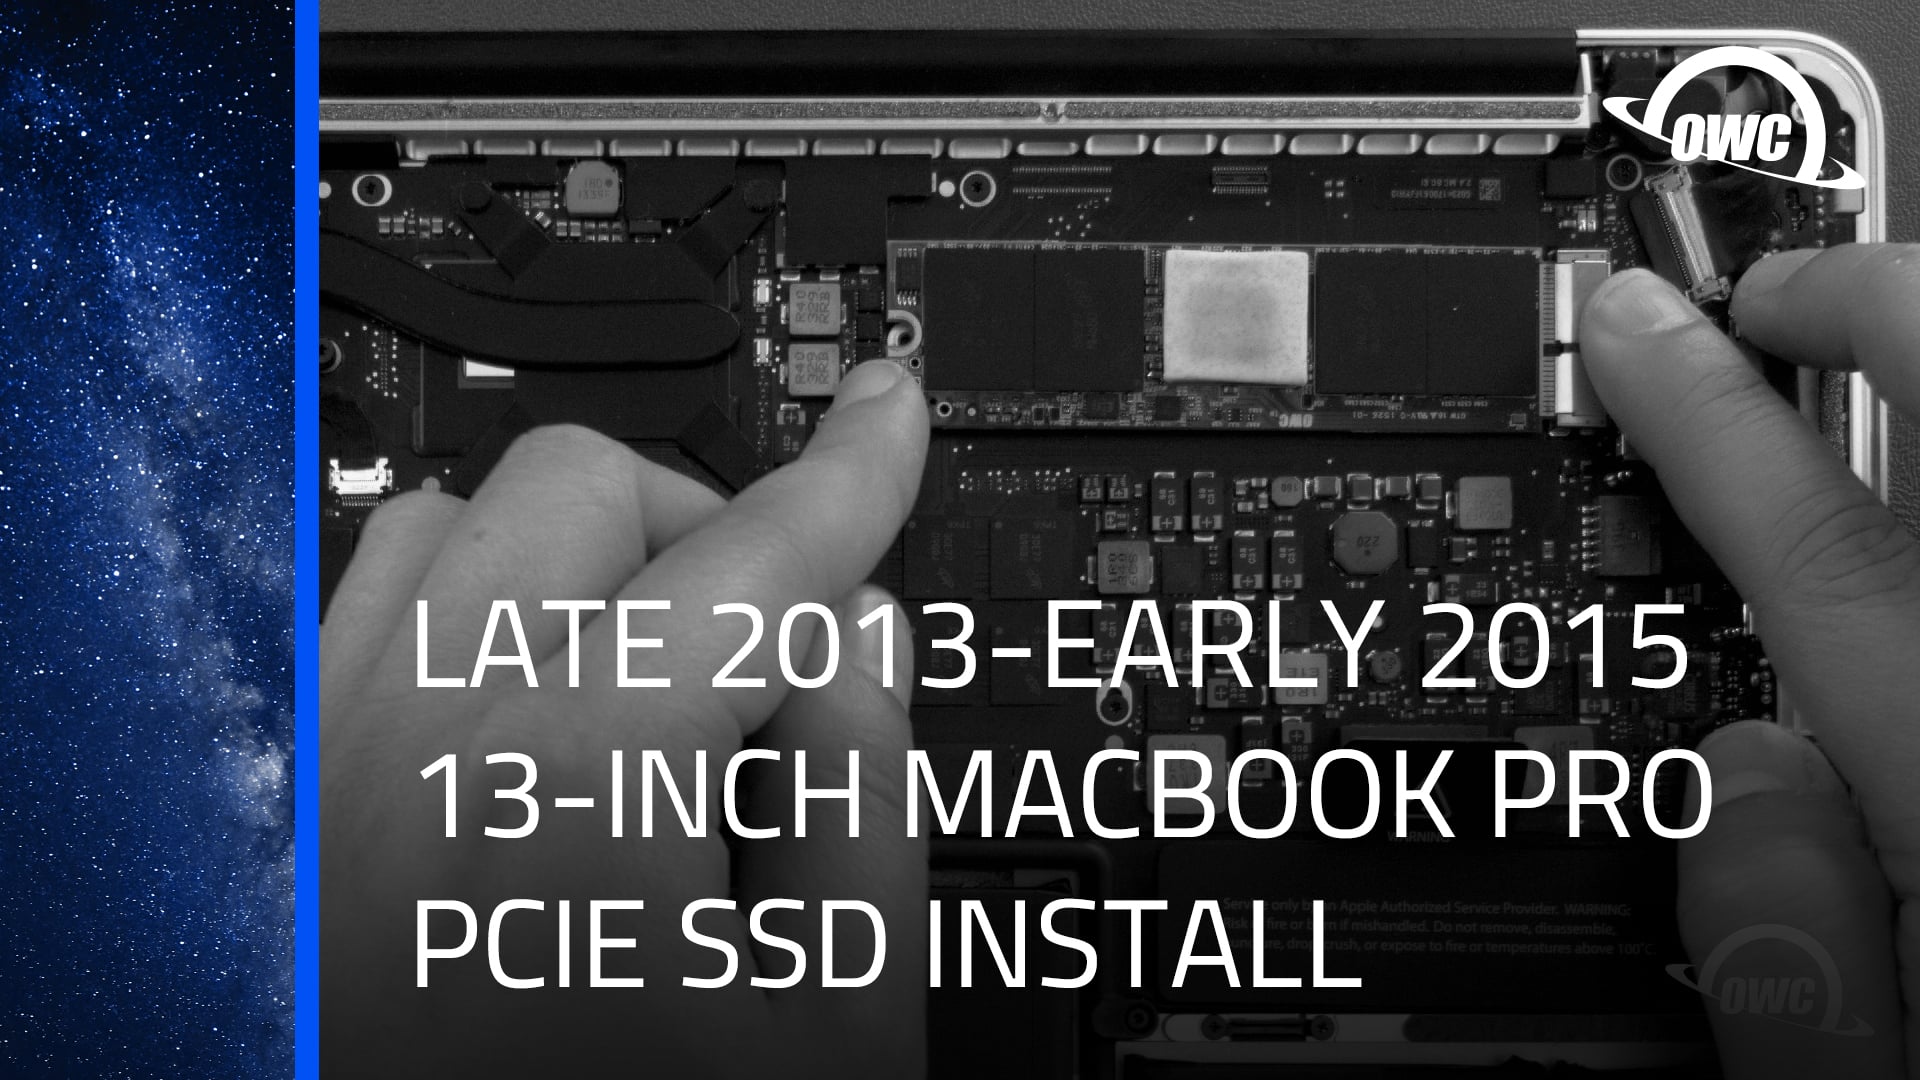 How to Upgrade the SSD in a 13-inch MacBook Pro w/ Retina display (Late 2013 - Early on Vimeo